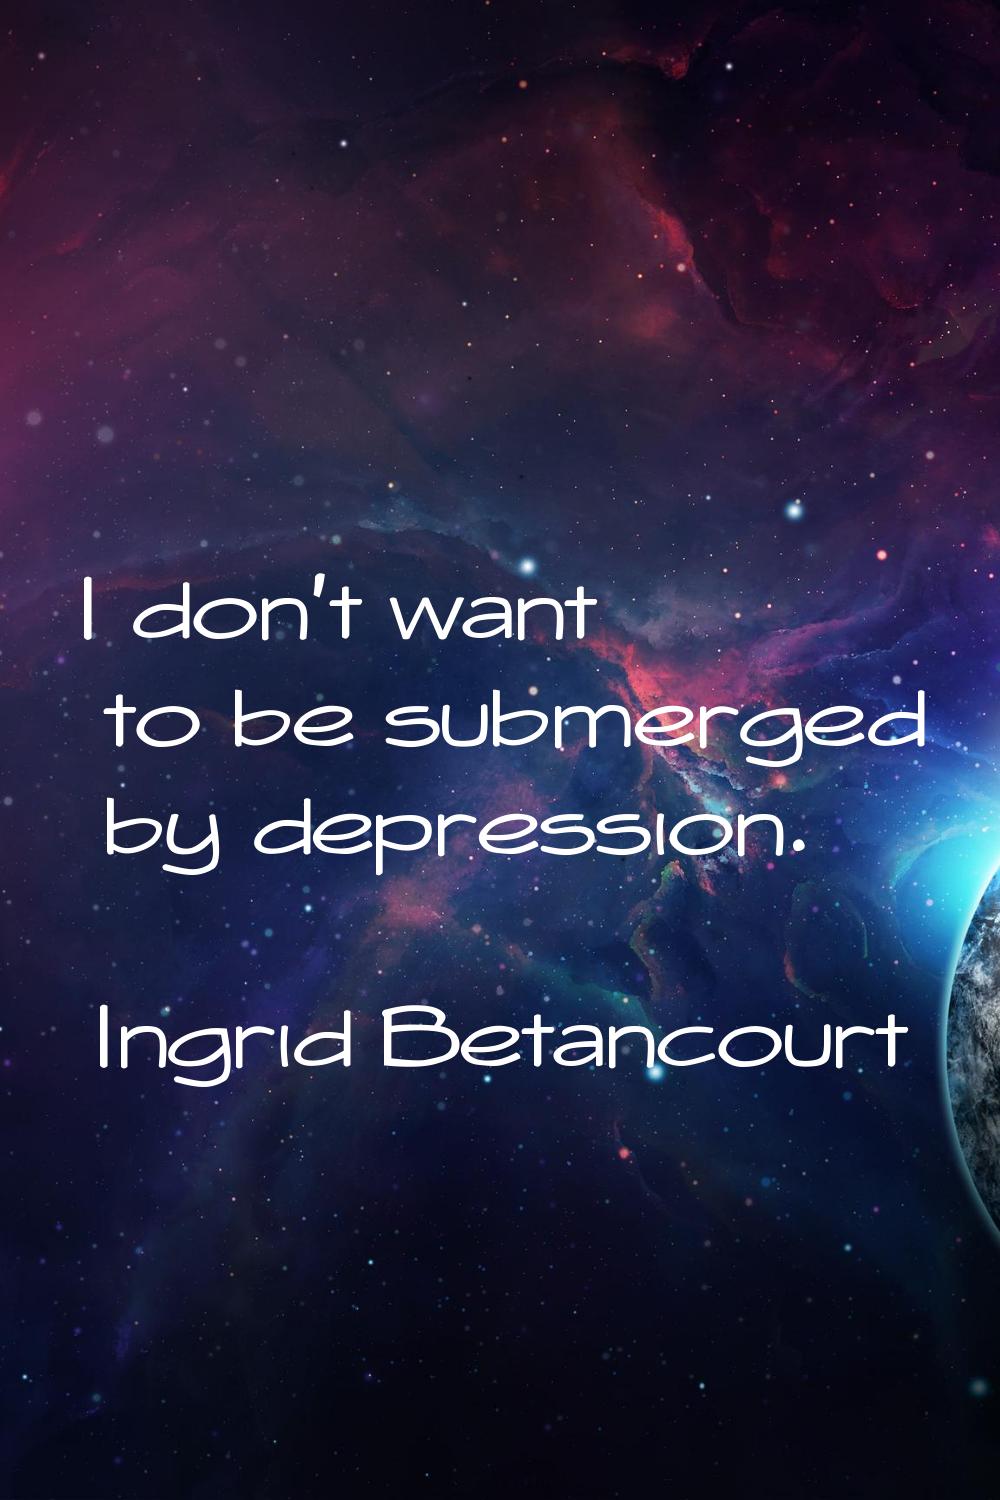 I don't want to be submerged by depression.